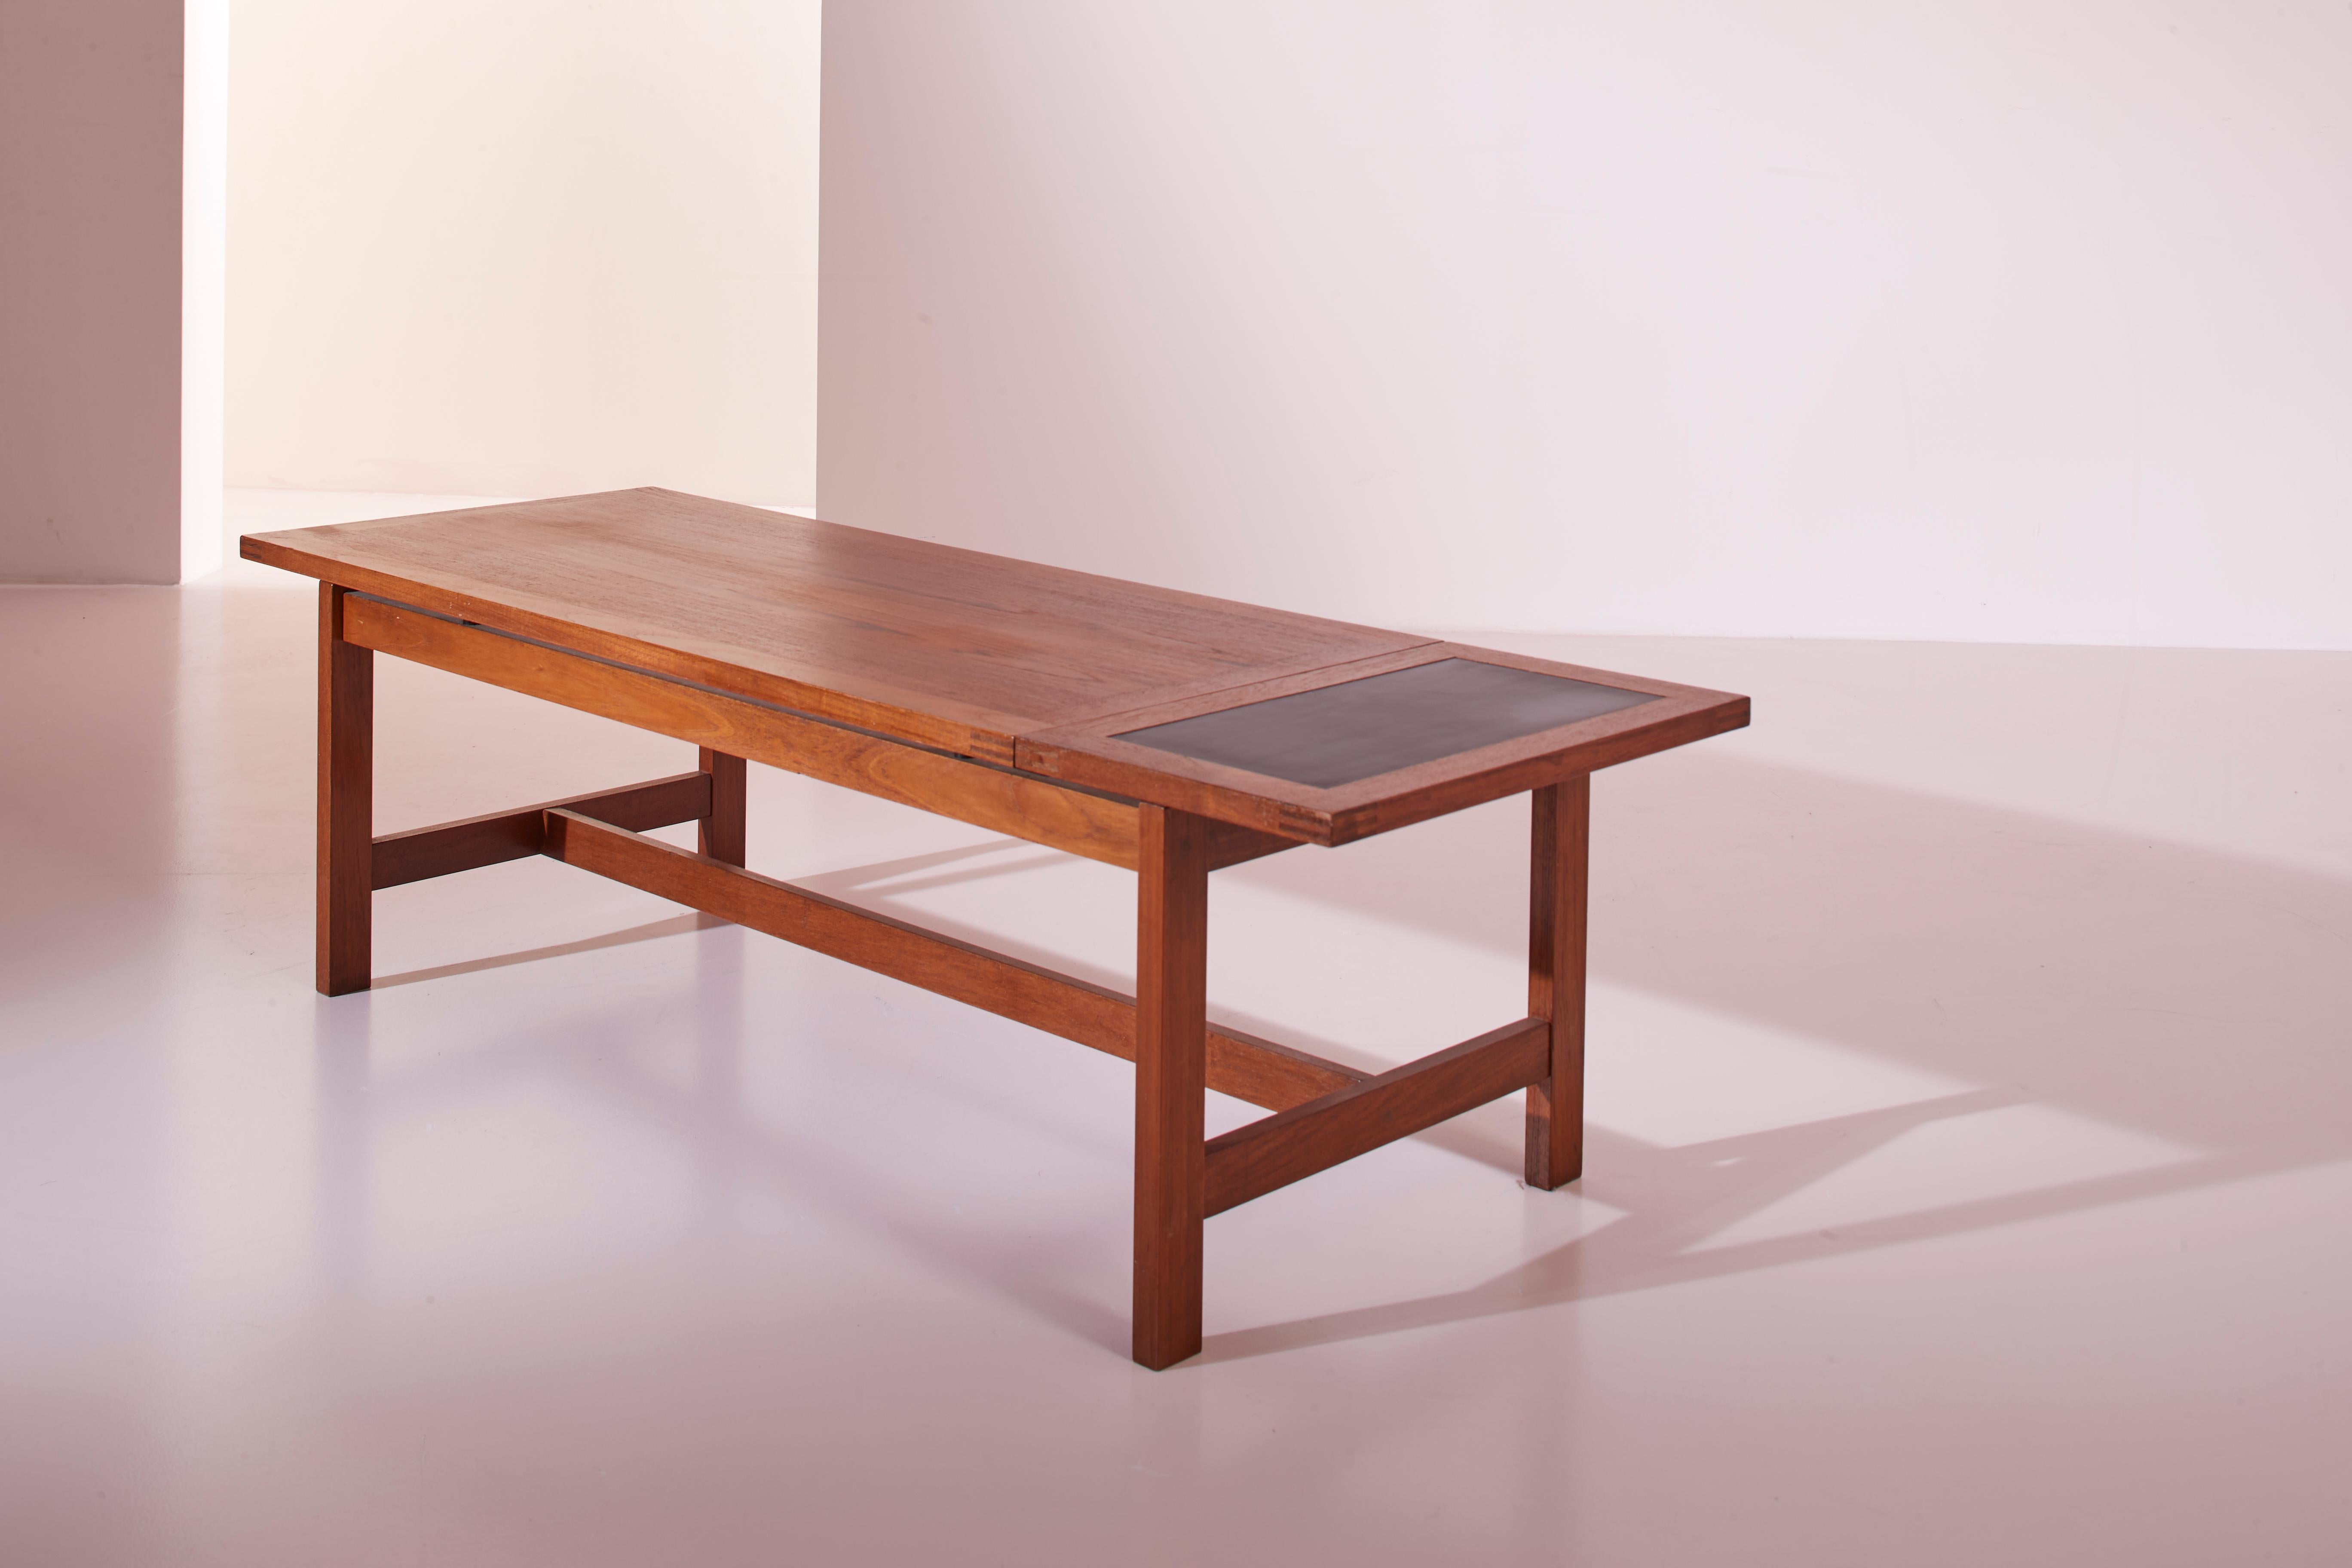 A danish solid teak coffee table, produced by France & Son in the Sixties.

This coffee table stands out for its simple line and a mechanism that allows expanding the surface when needed. The main teak top slides on dedicated rails, allowing the